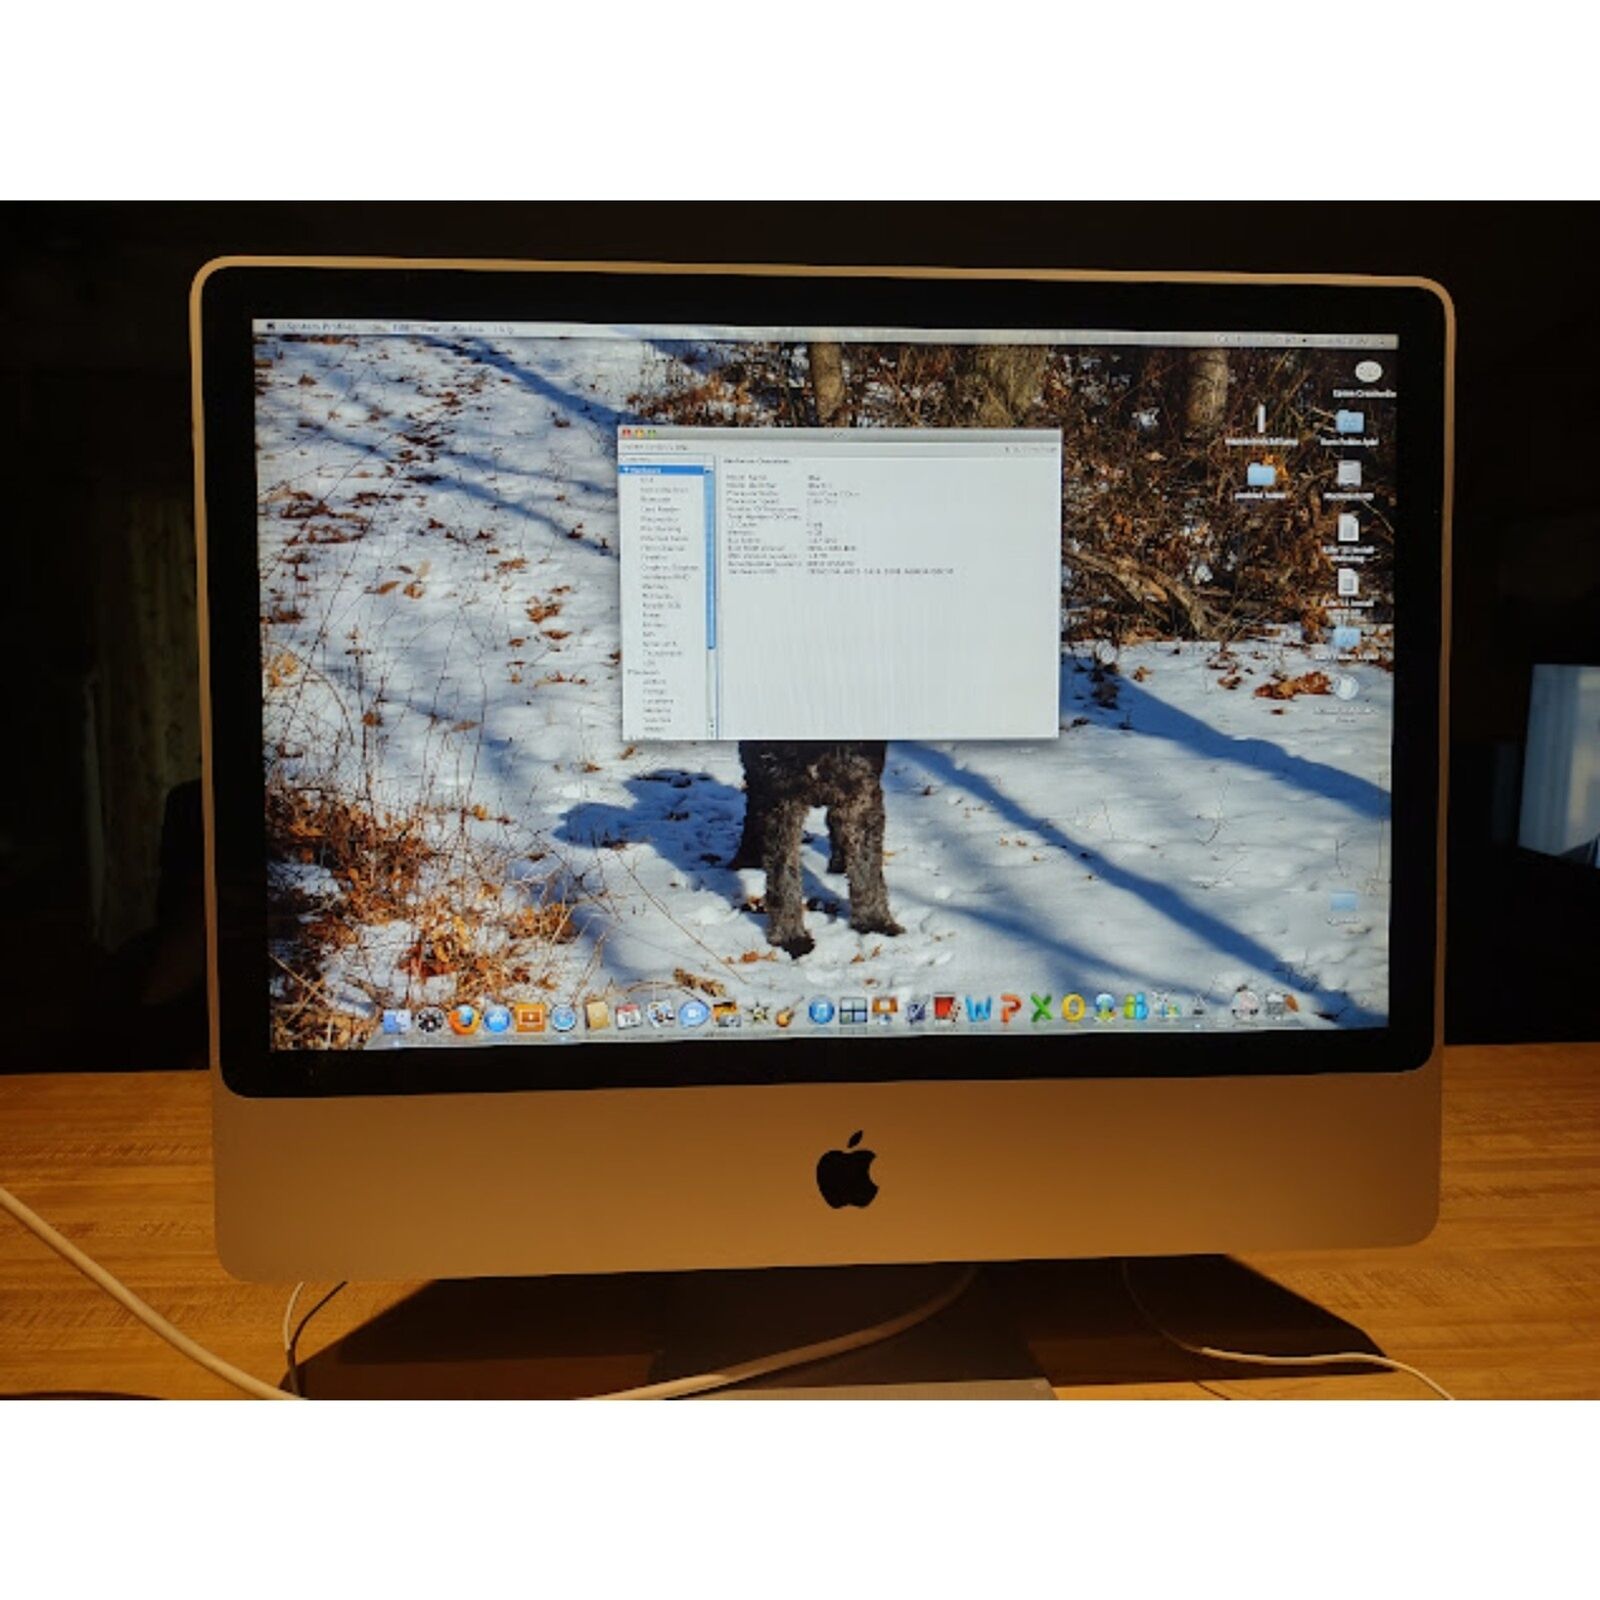 Apple iMac 9,1 Desktop Computer With Mouse and Keyboard